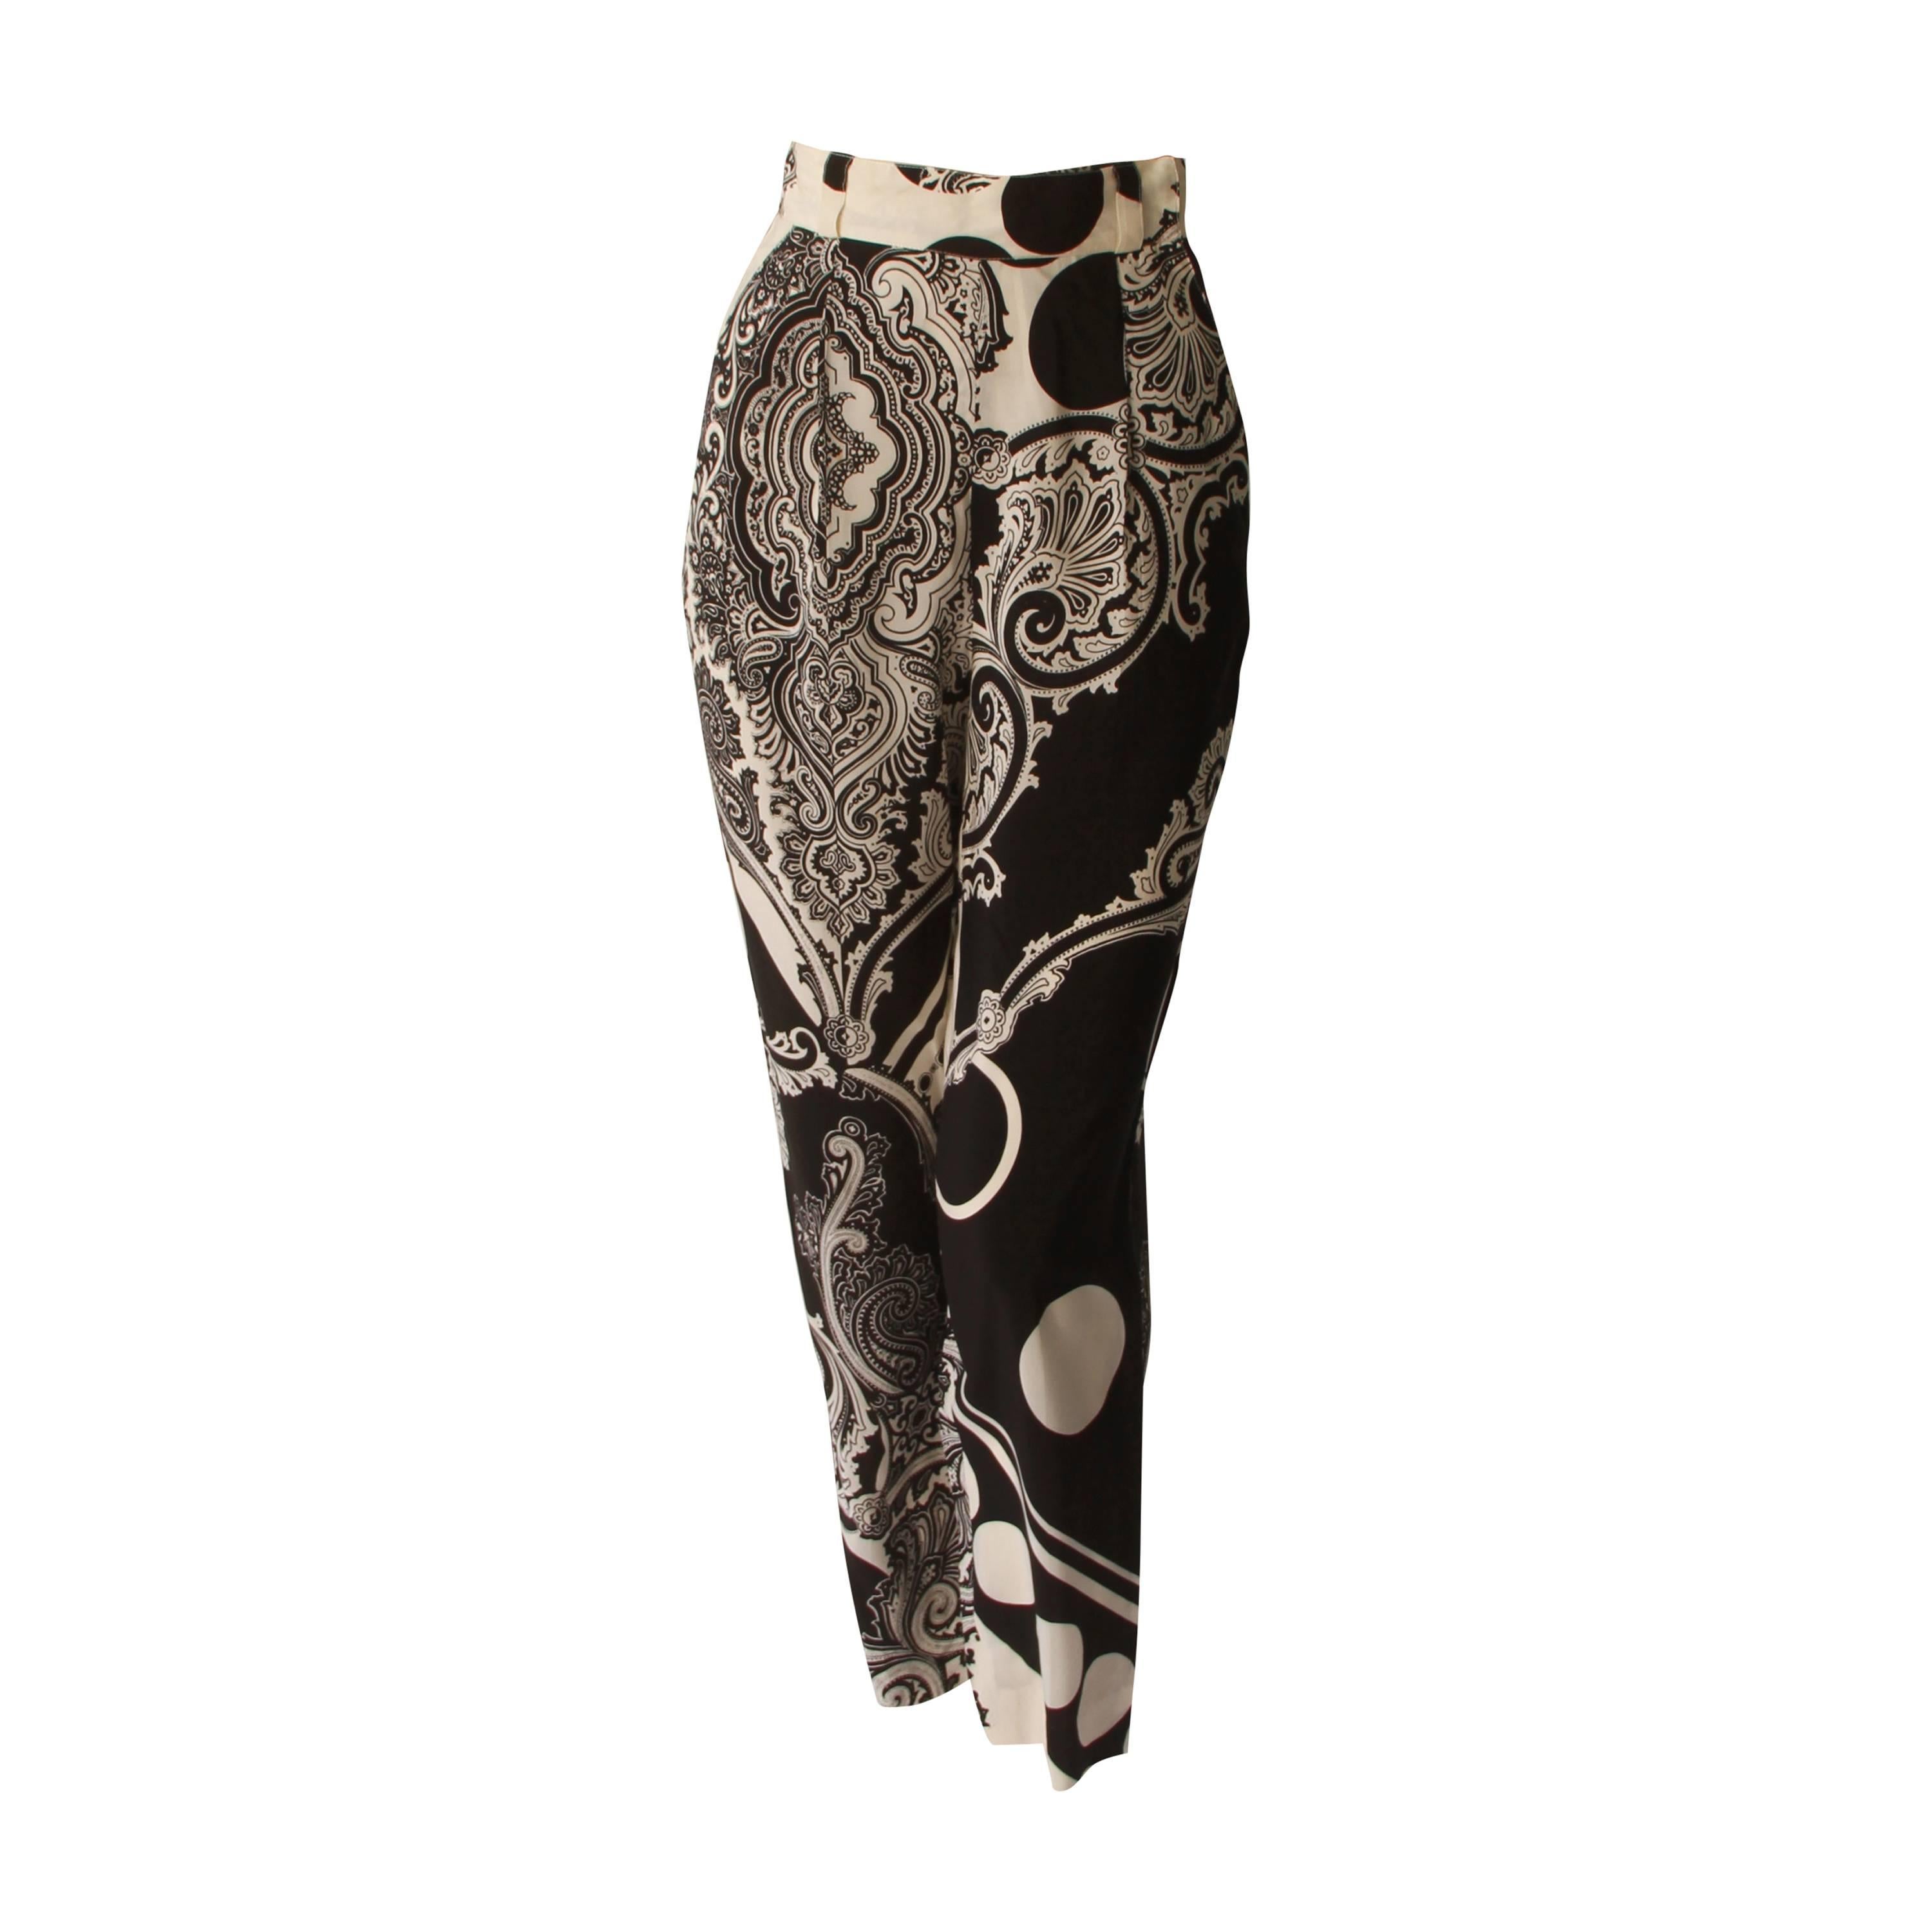 Gianni Versace Silk Printed Pants Spring 1991 For Sale